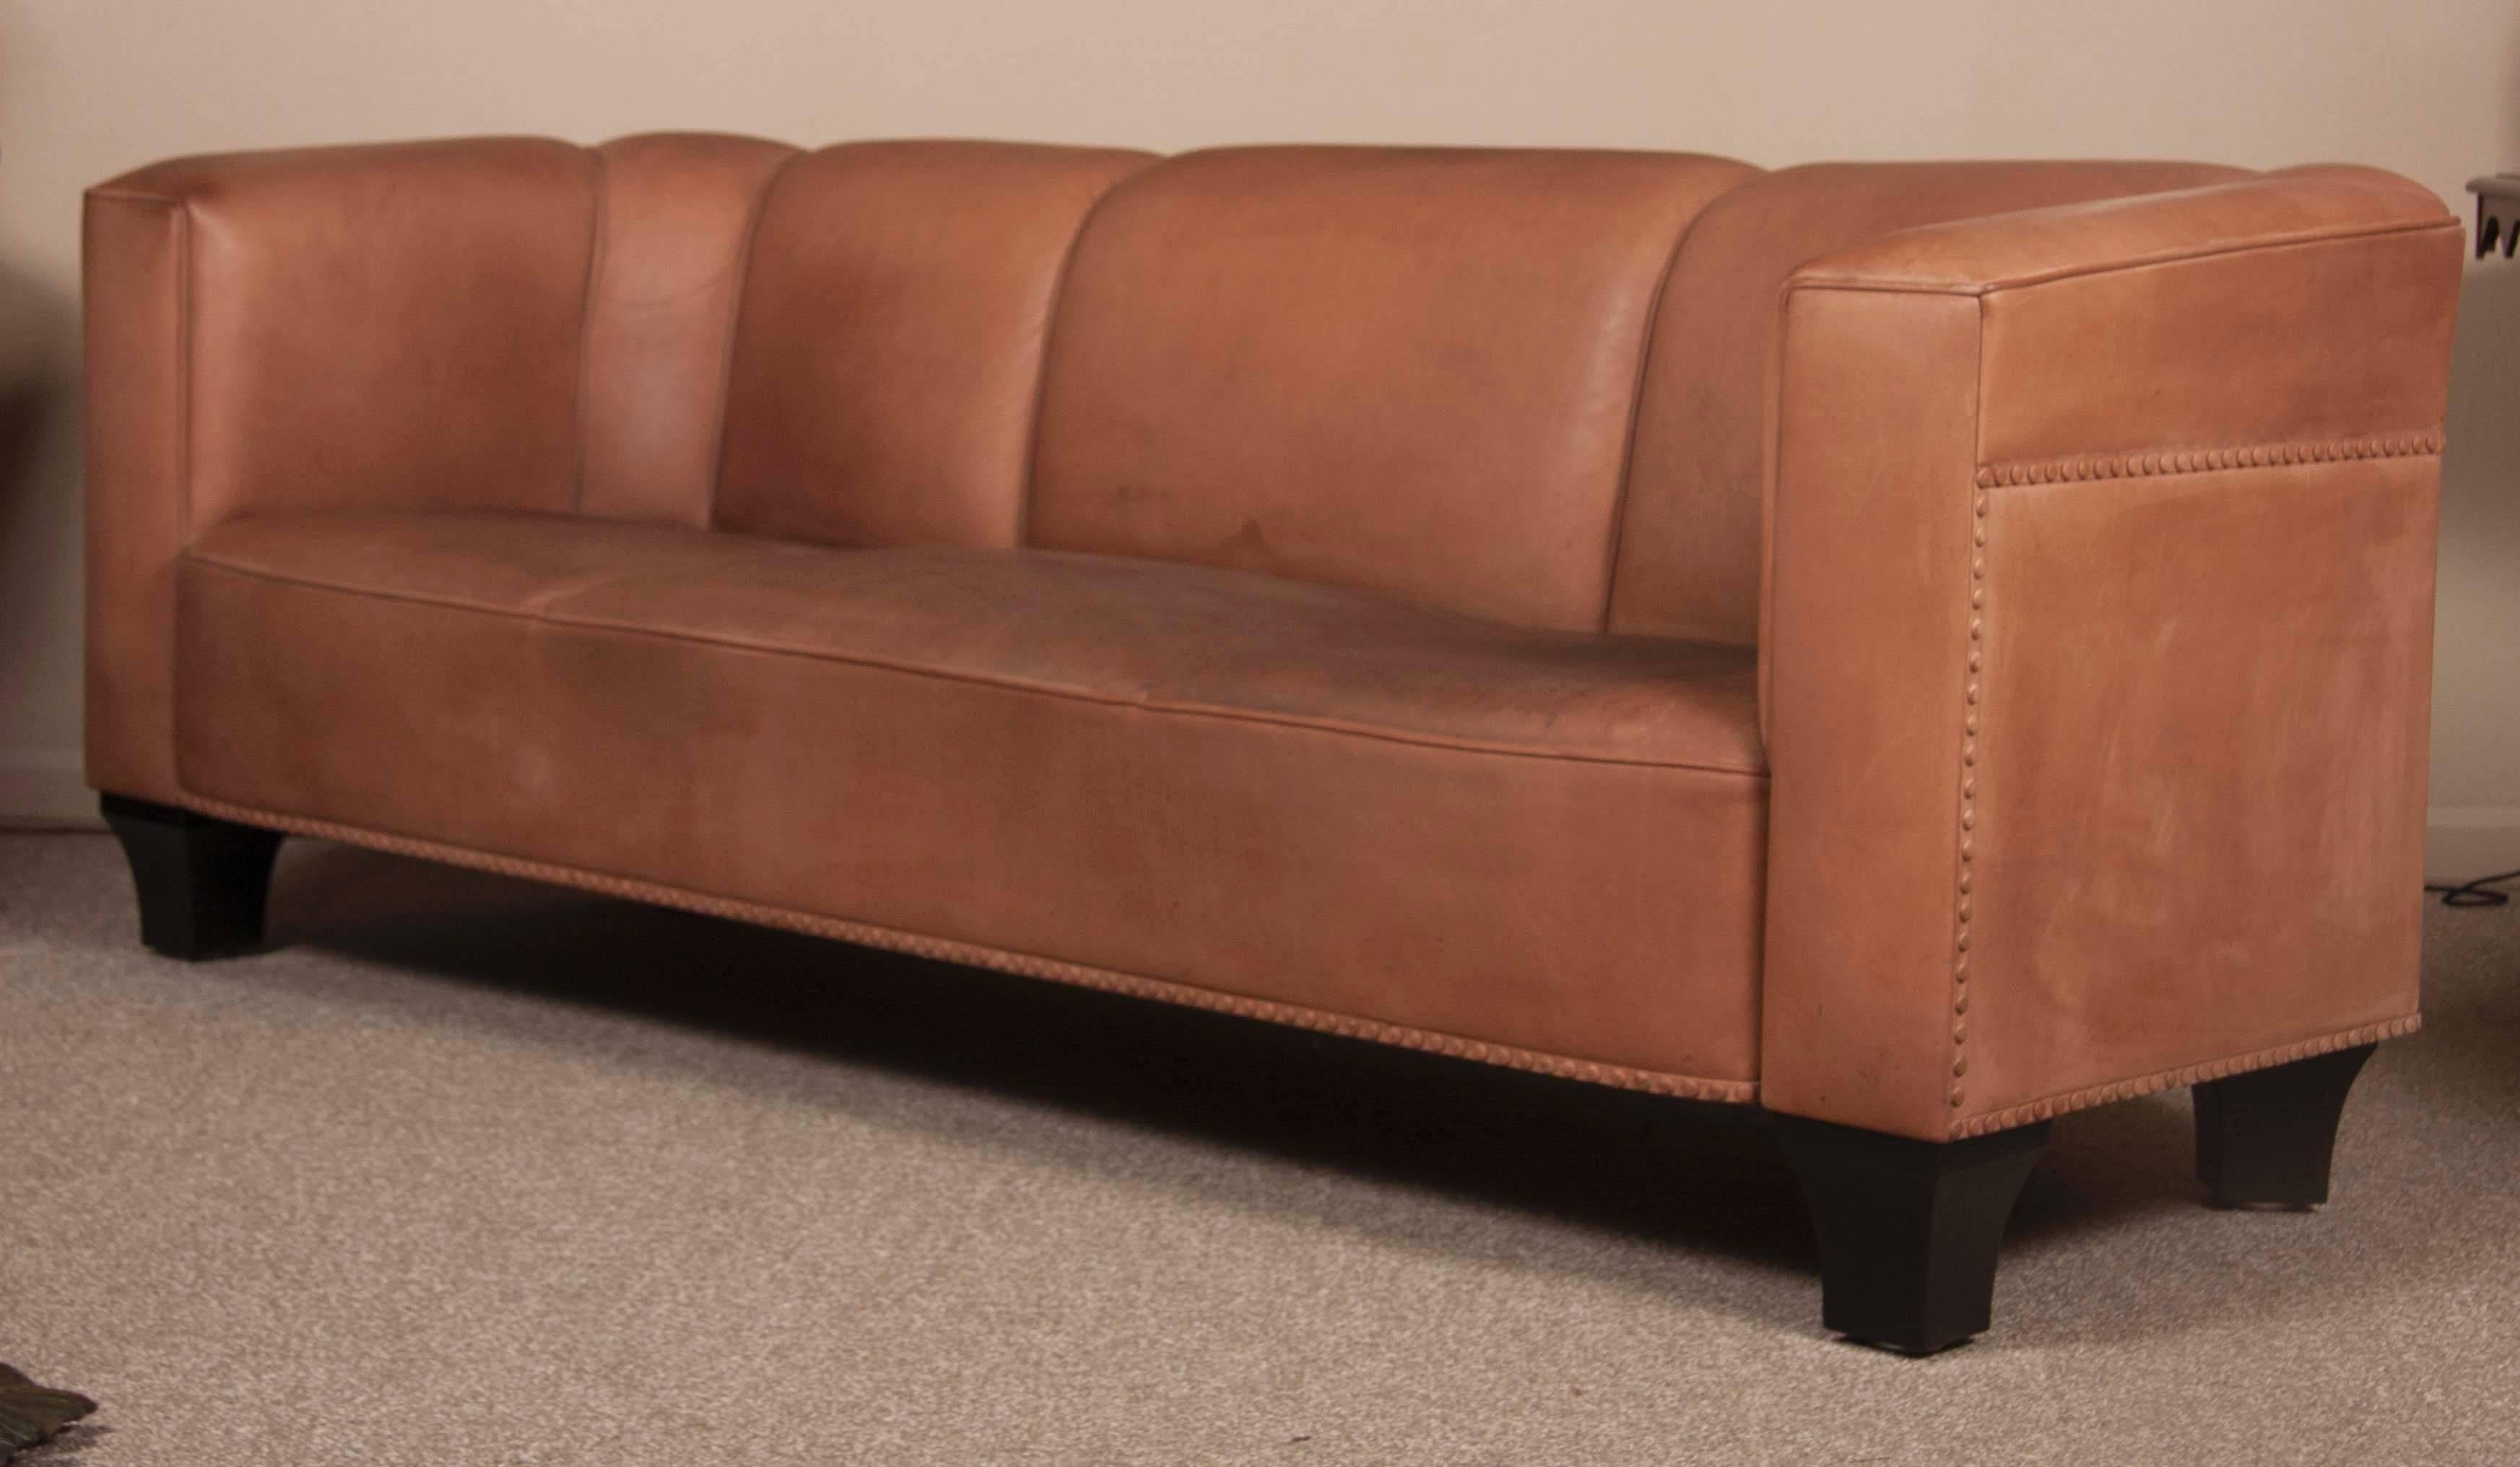 A contemporary brown leather three-seat sofa by Austrian designer Josef Hoffmann (1870-1956) with label 